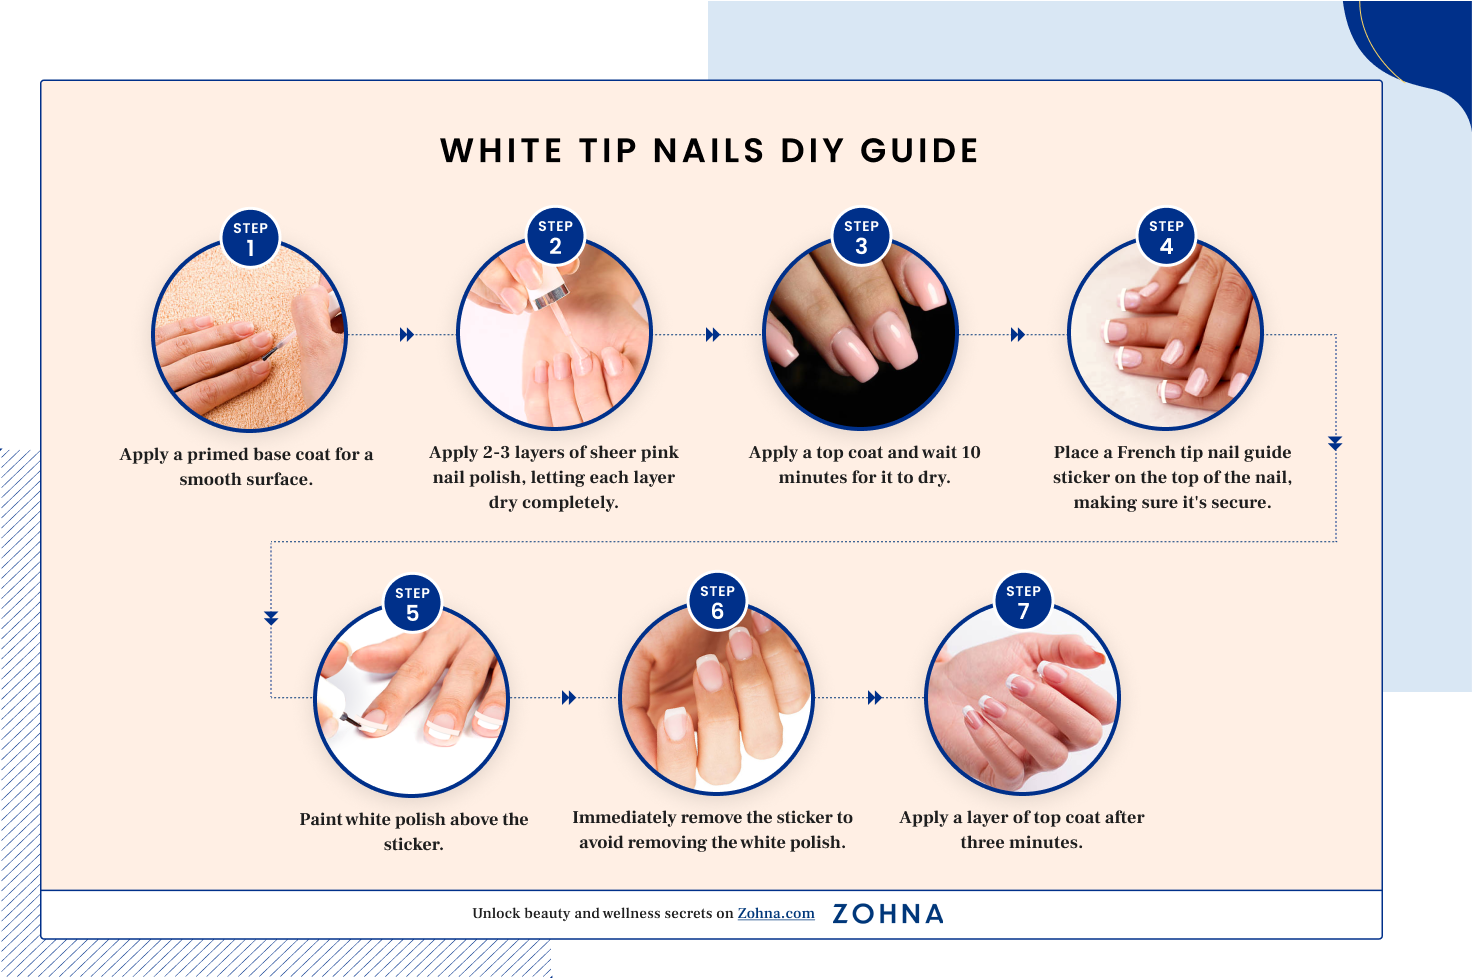 White Tip Nails DIY Guide